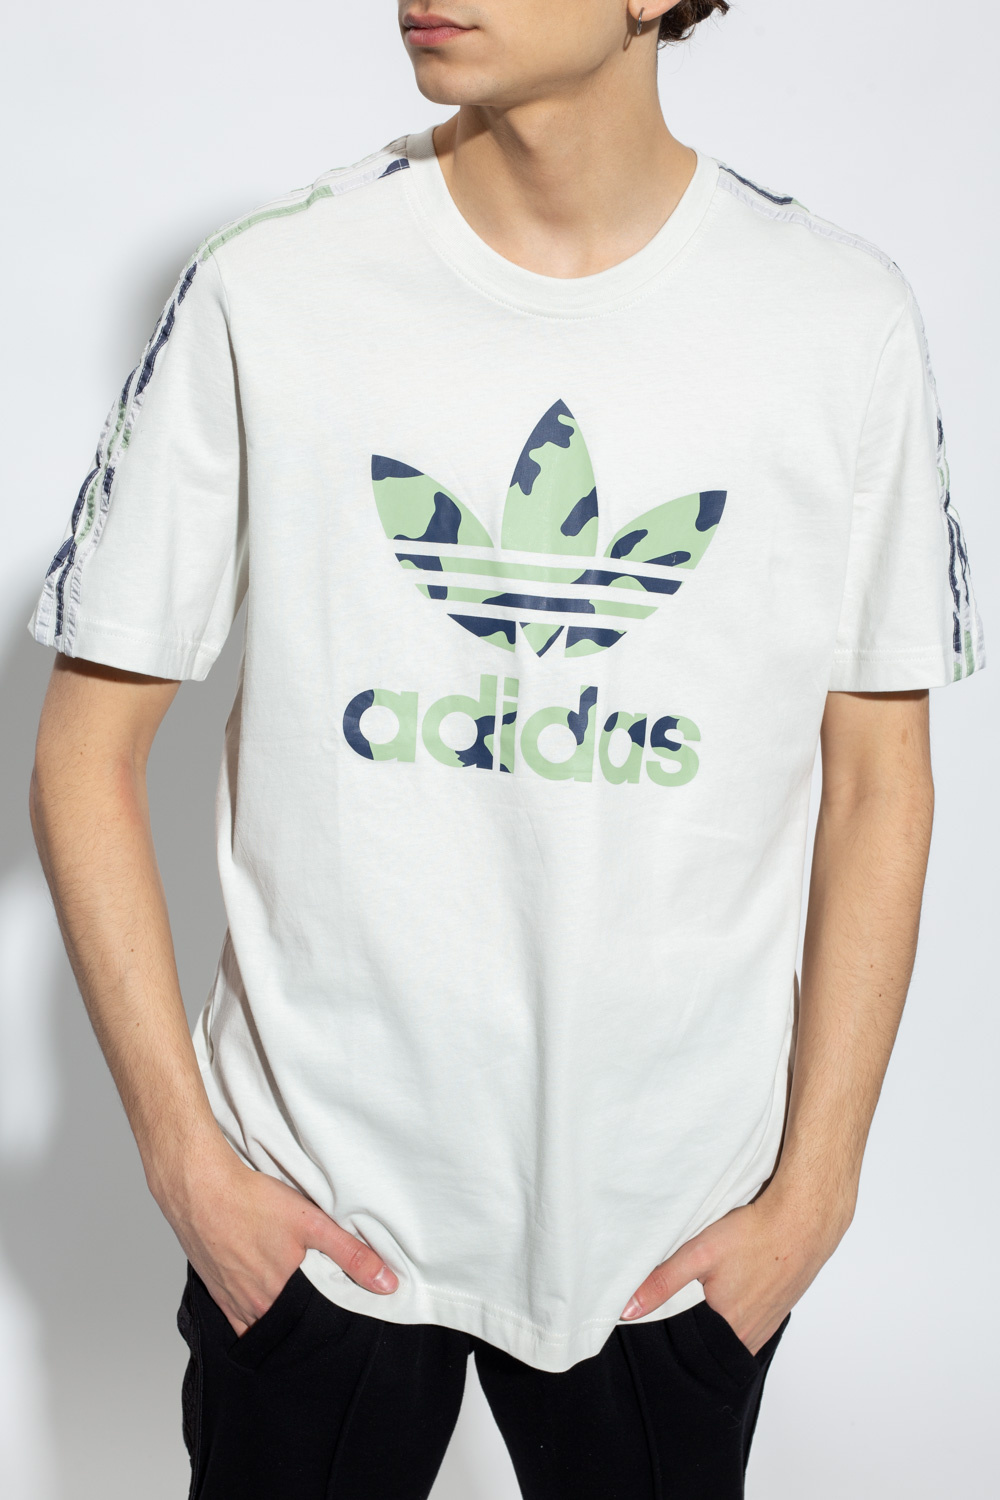 ADIDAS Originals adidas crate and pillow size inches chart online